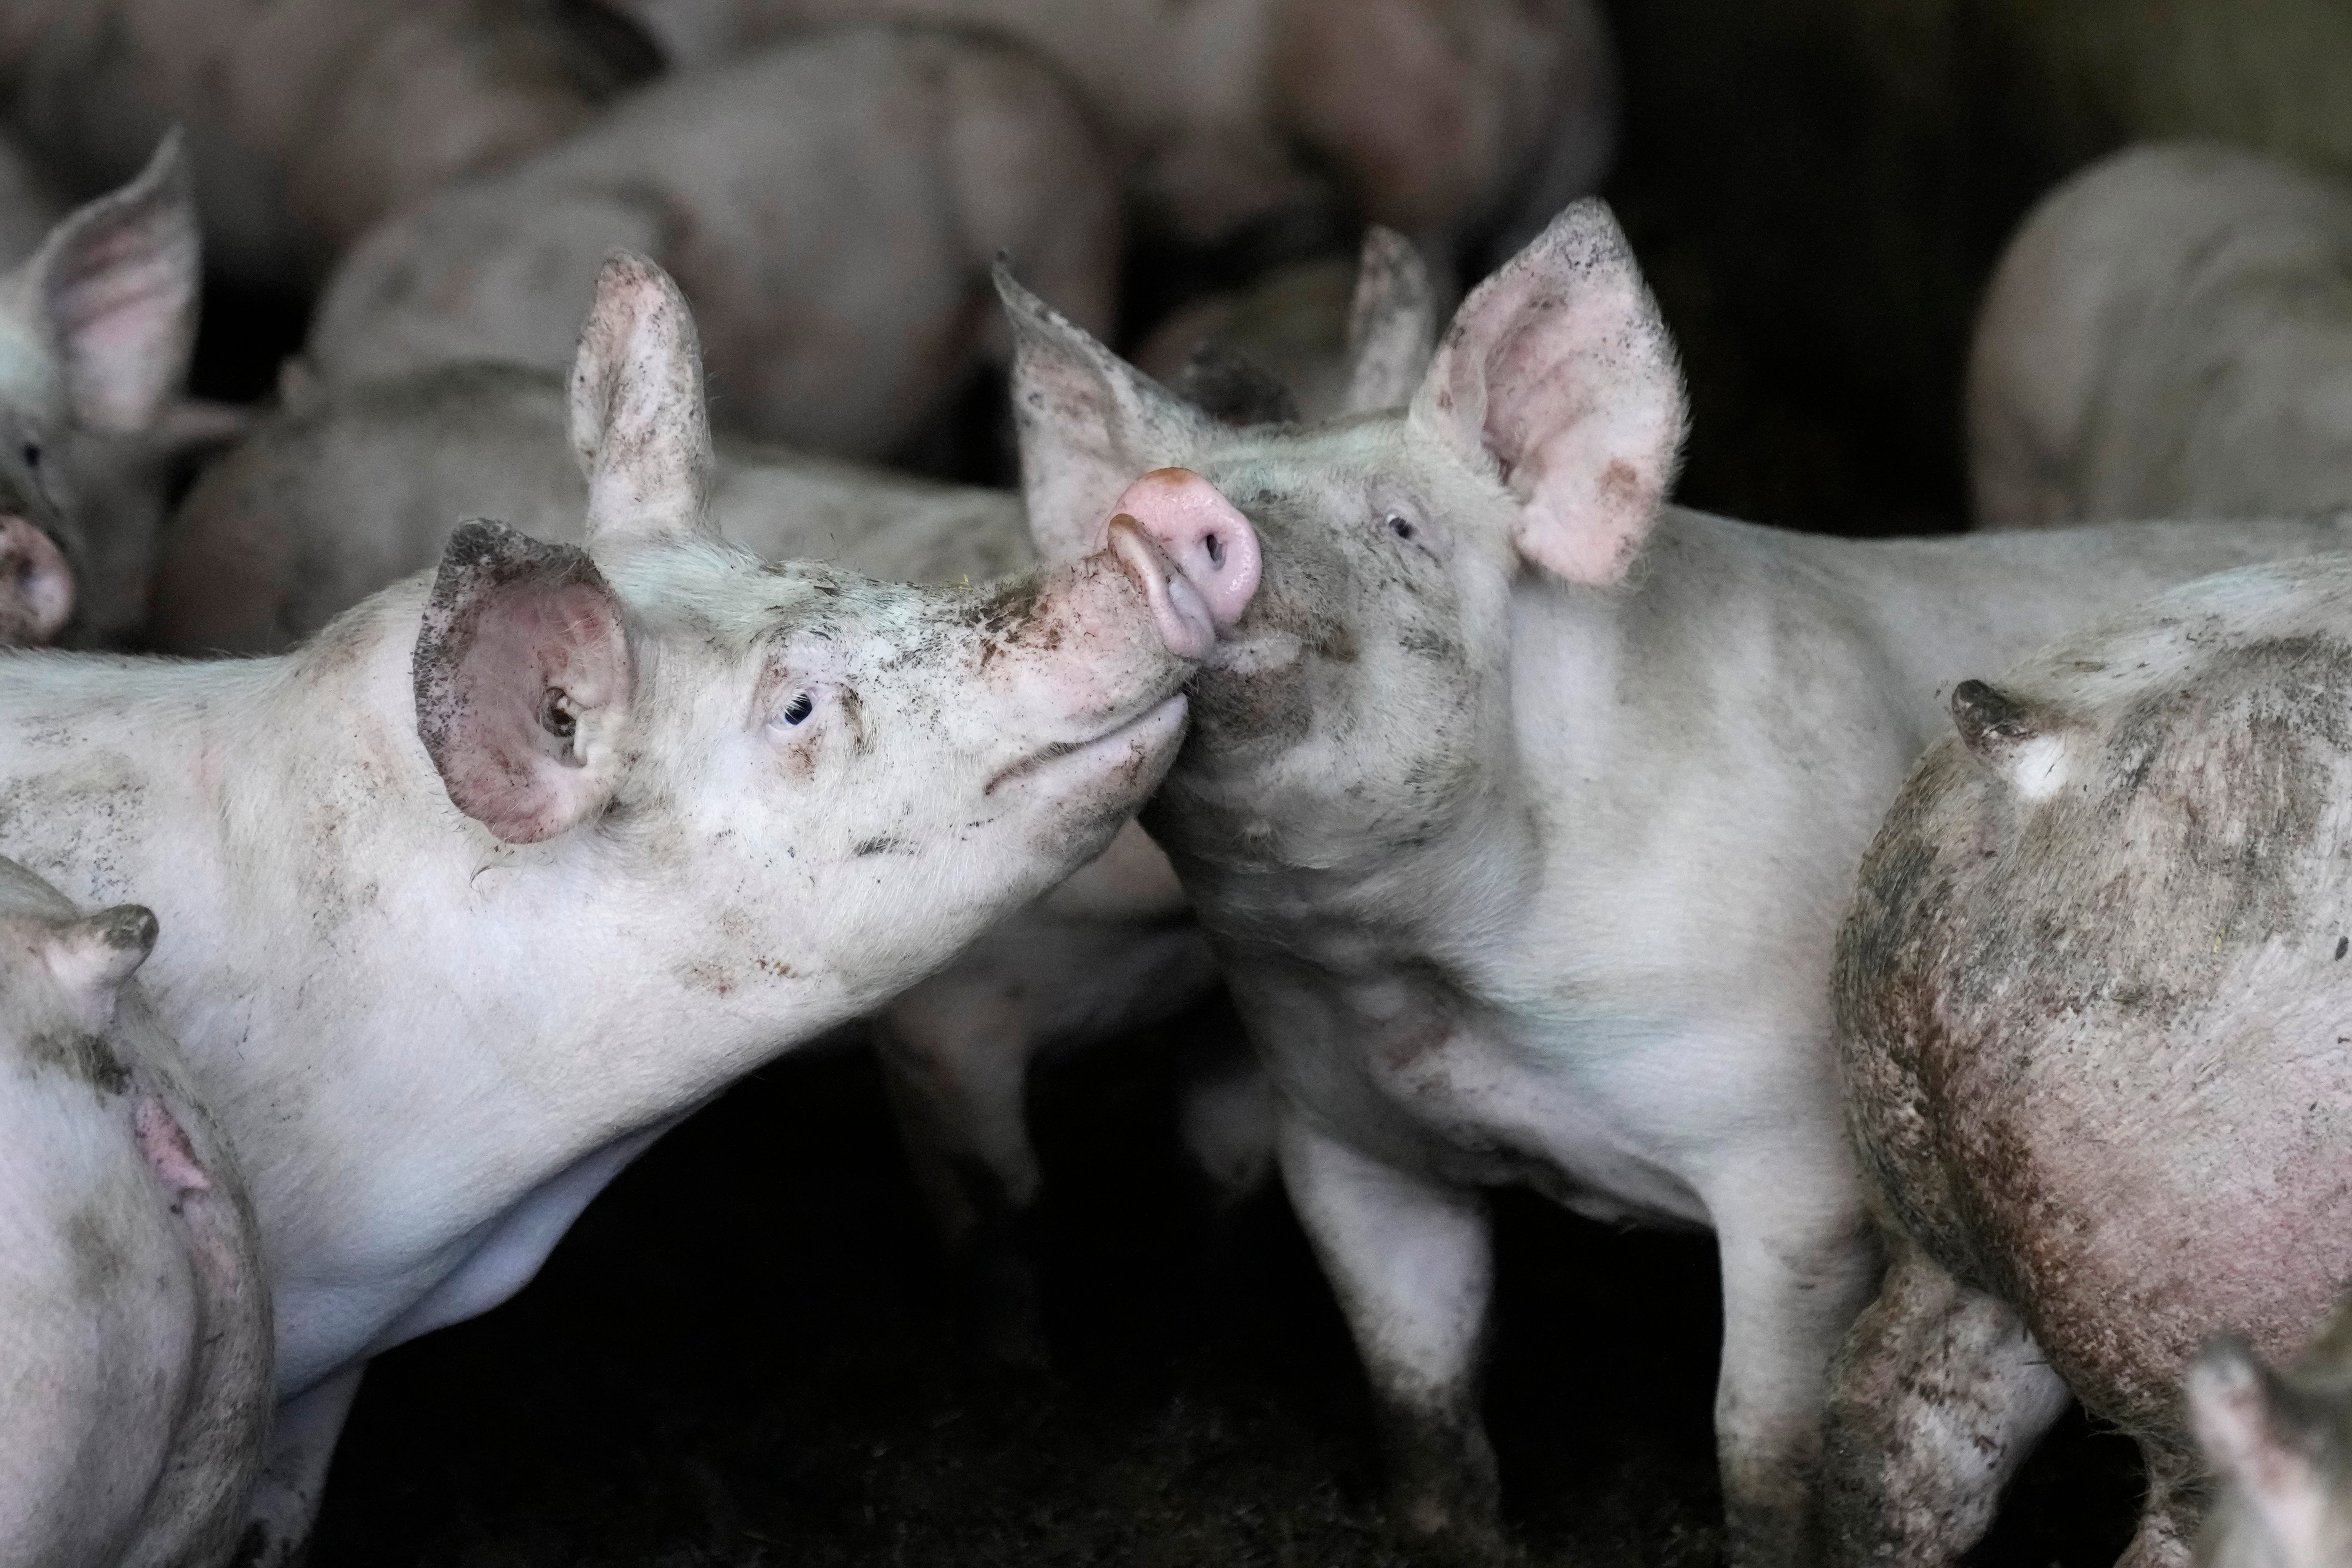 The disease can often prove fatal to domestic pigs and has spread in Europe over the last year